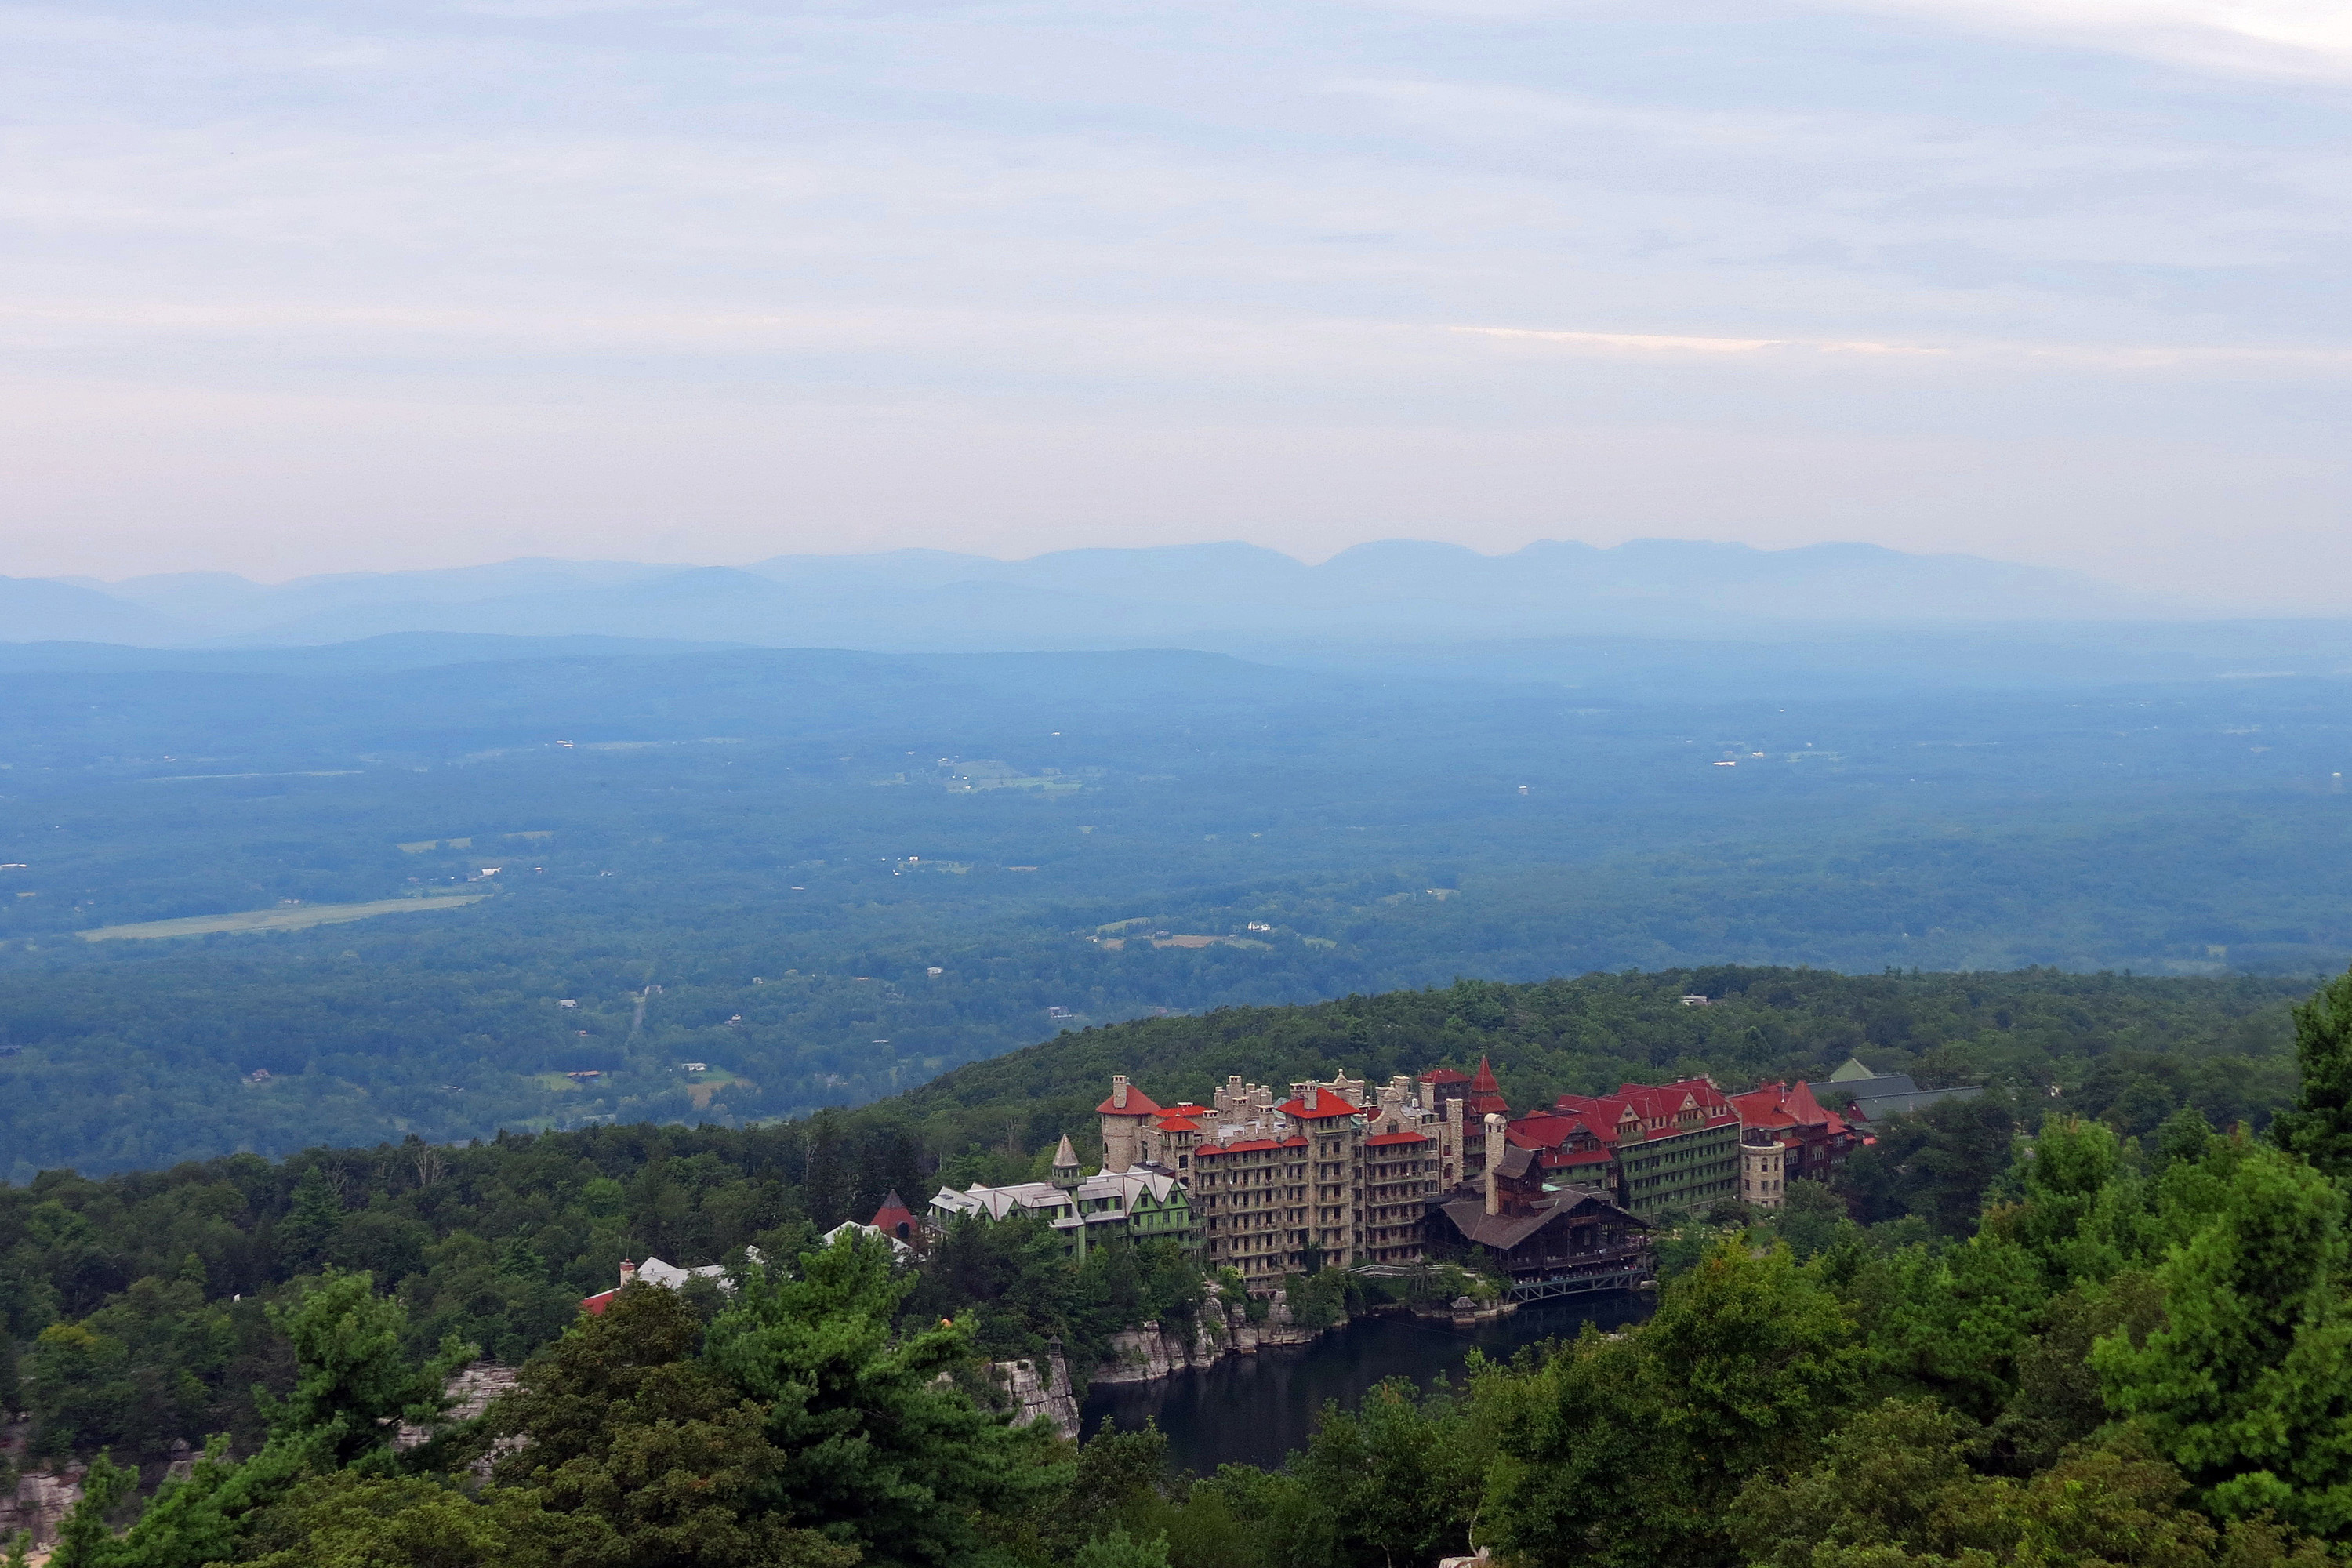 Mohonk mountain house resort from skytop tower photo